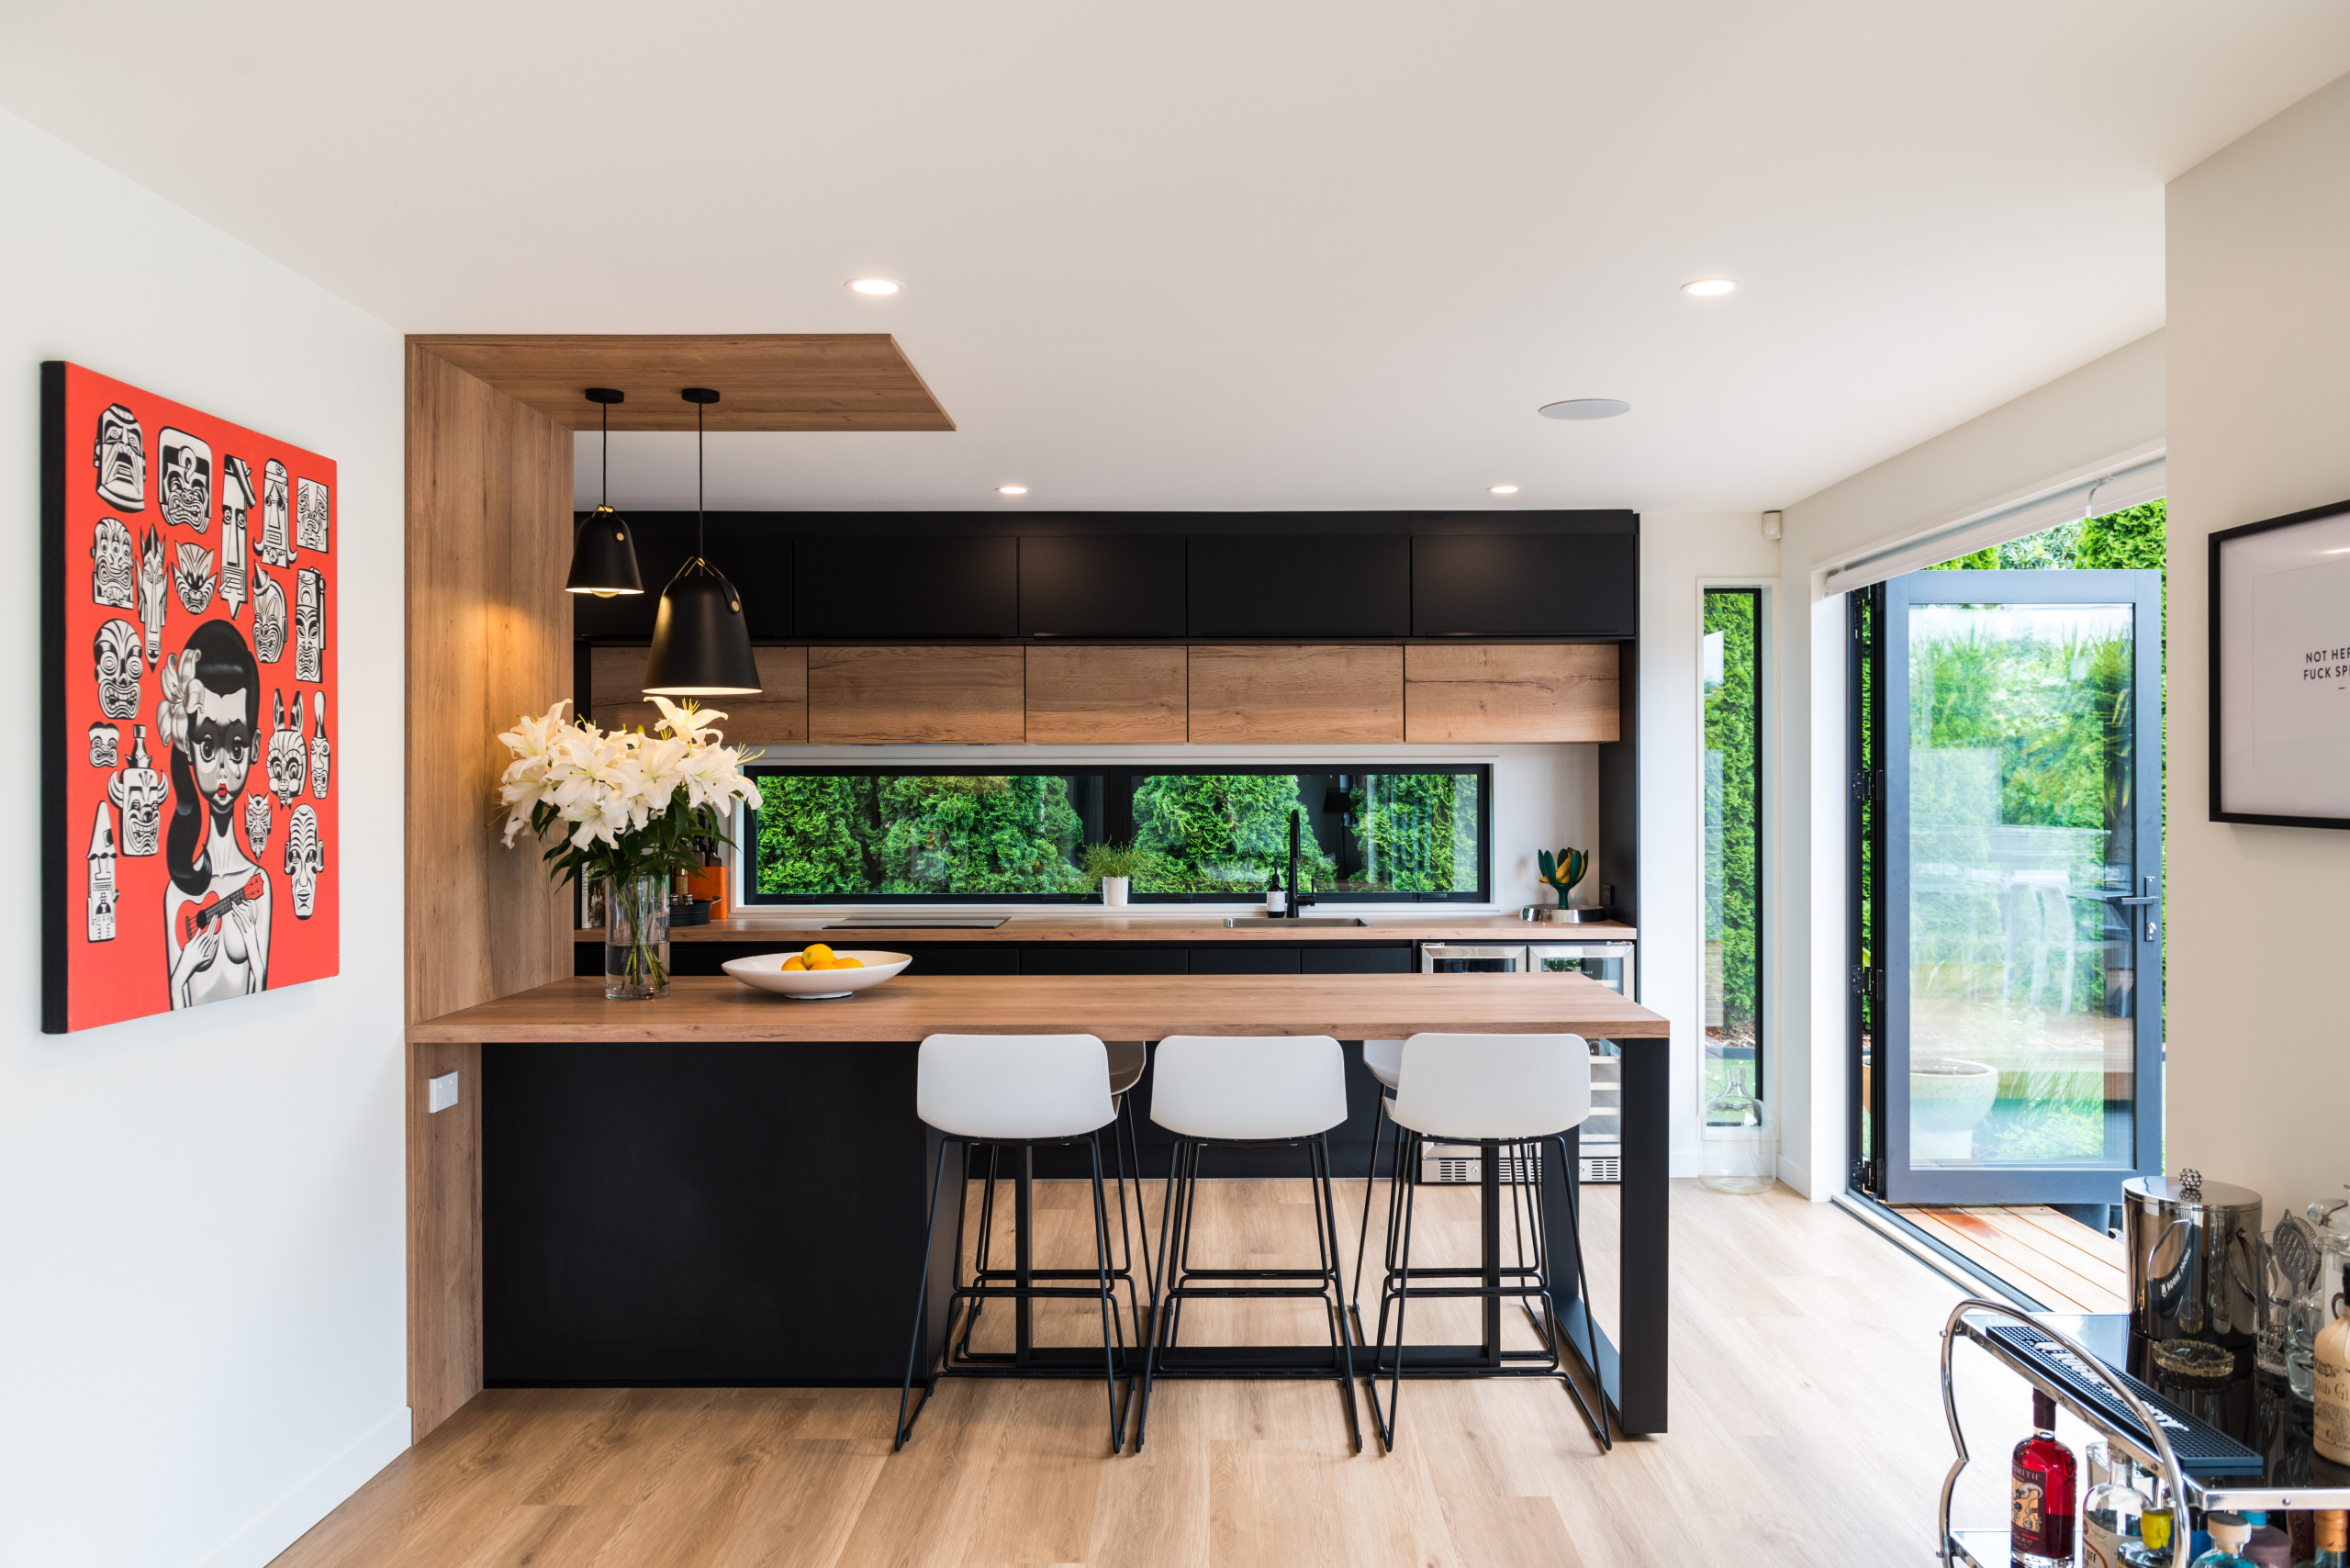 The new floorplan for this renovation flipped the kitchen and living areas around to utilise the garden more effectively to create a lovely indoor / outdoor flow from the kitchen.